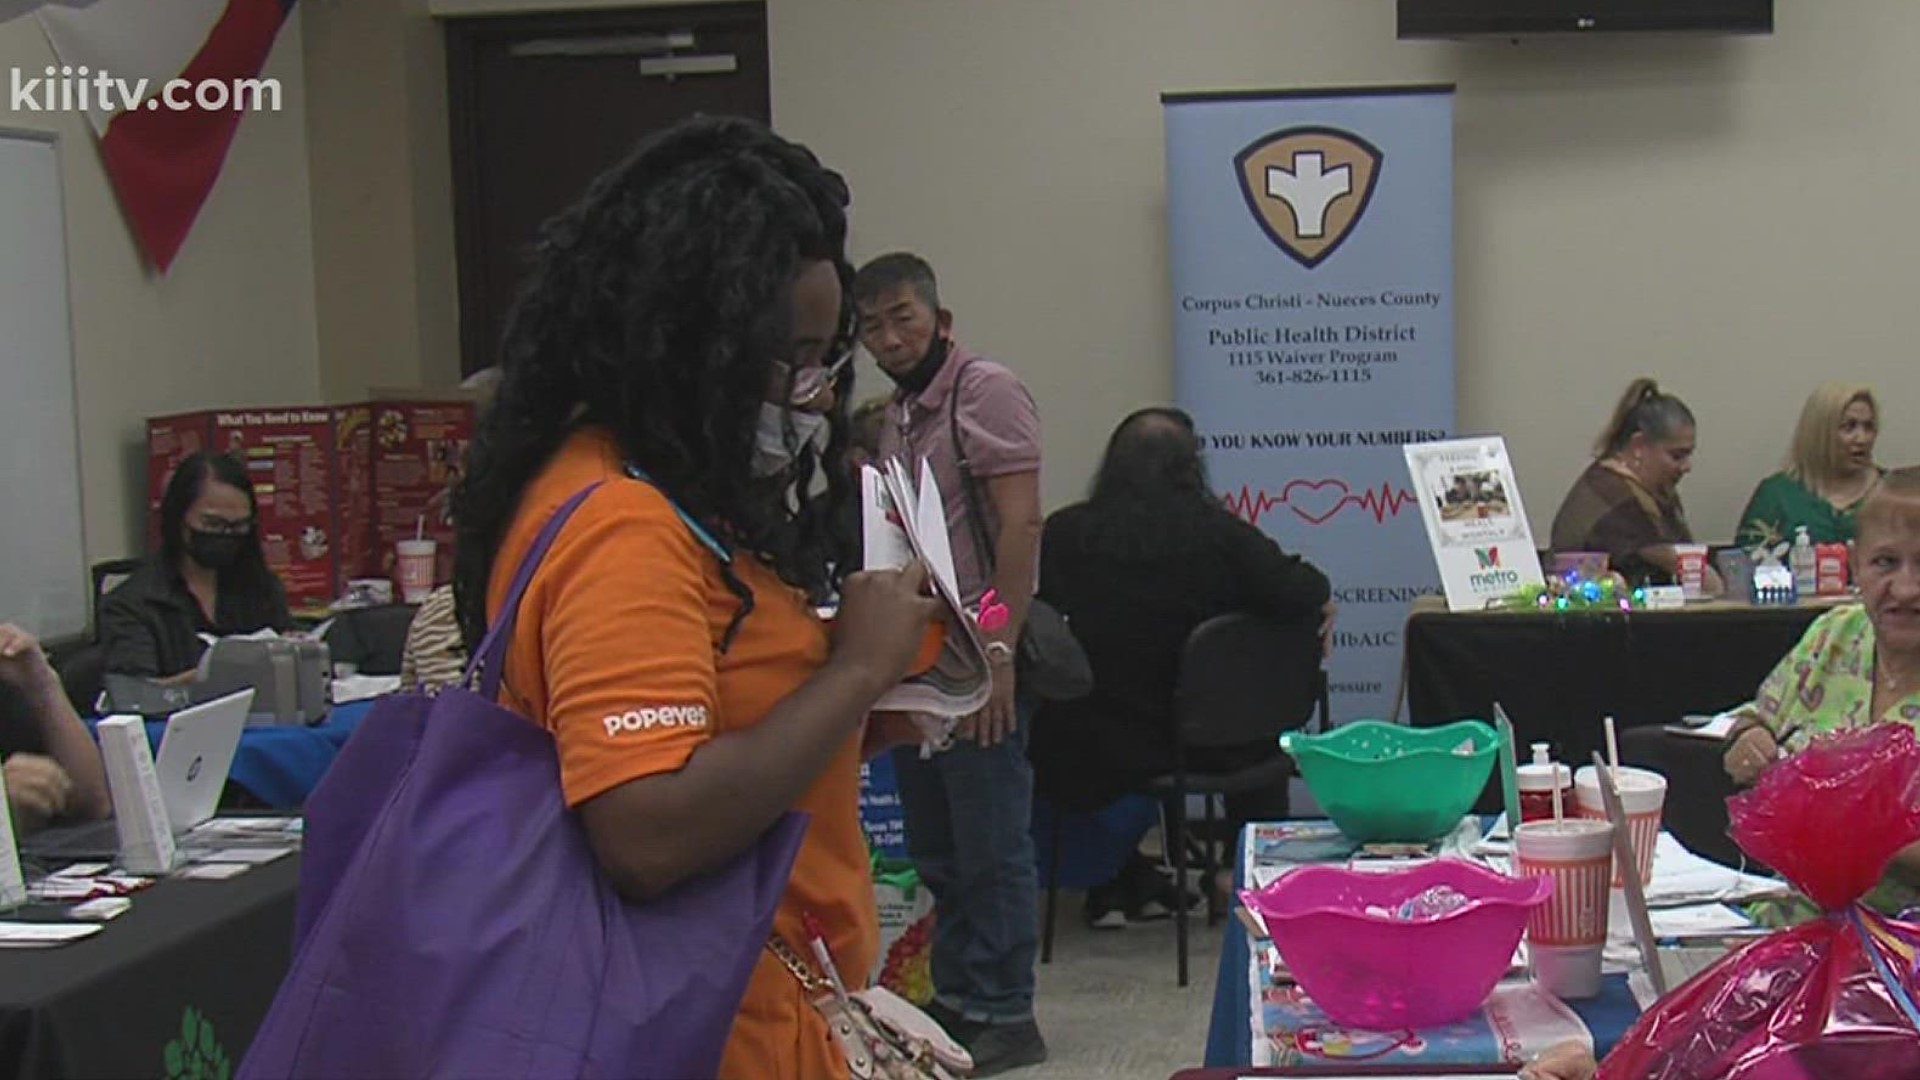 This event is part of National Public Health Week. It gave residents the opportunity to learn about existing programs and services provided by the Health District.